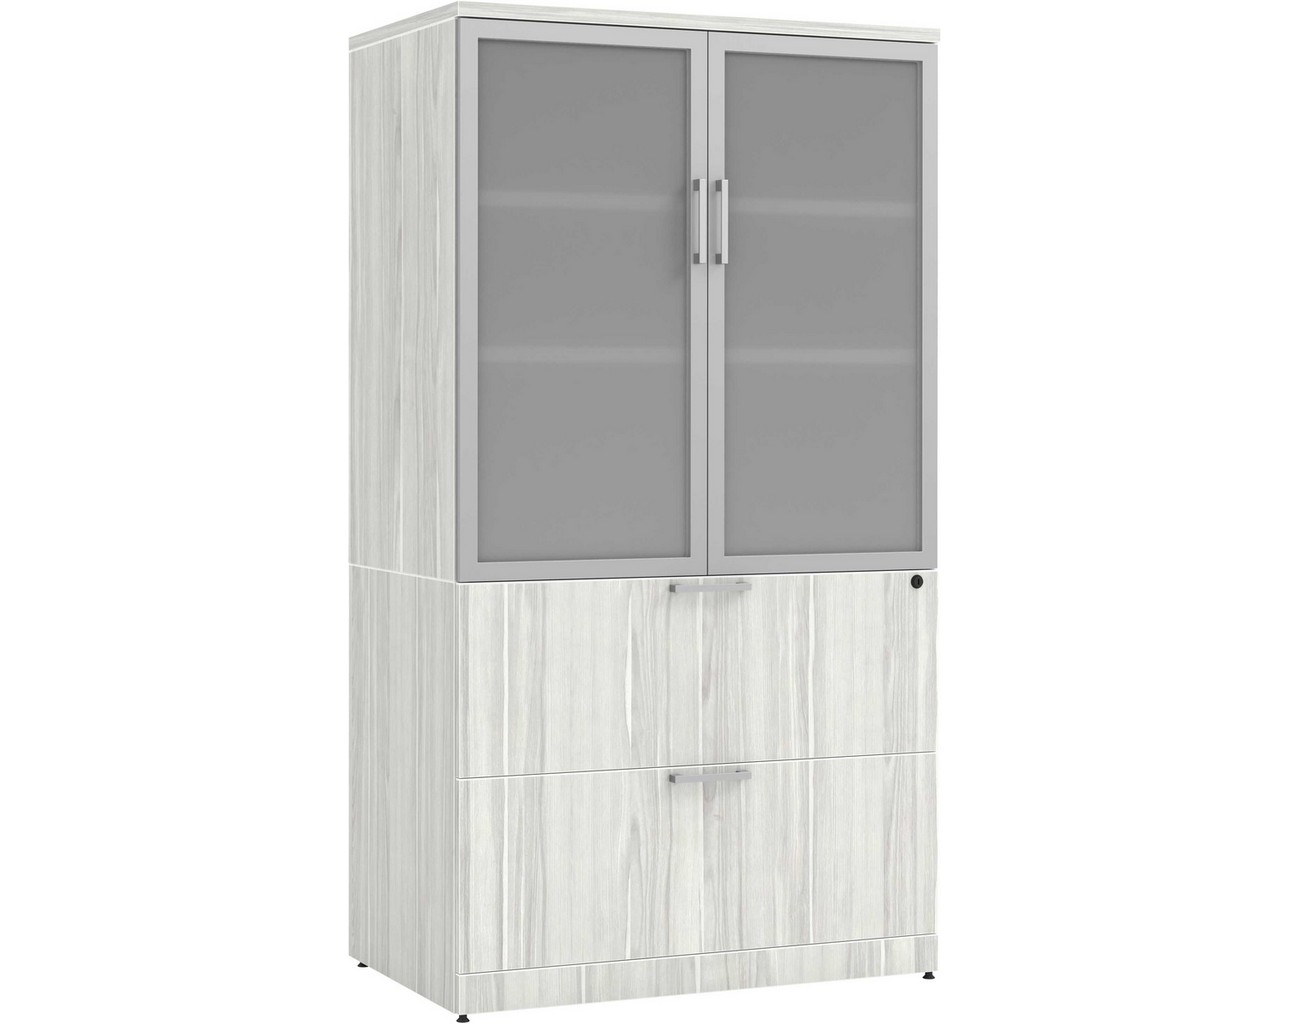 Locking Storage Cabinet and Lateral File Combo Unit with Glass Doors – Silver Birch